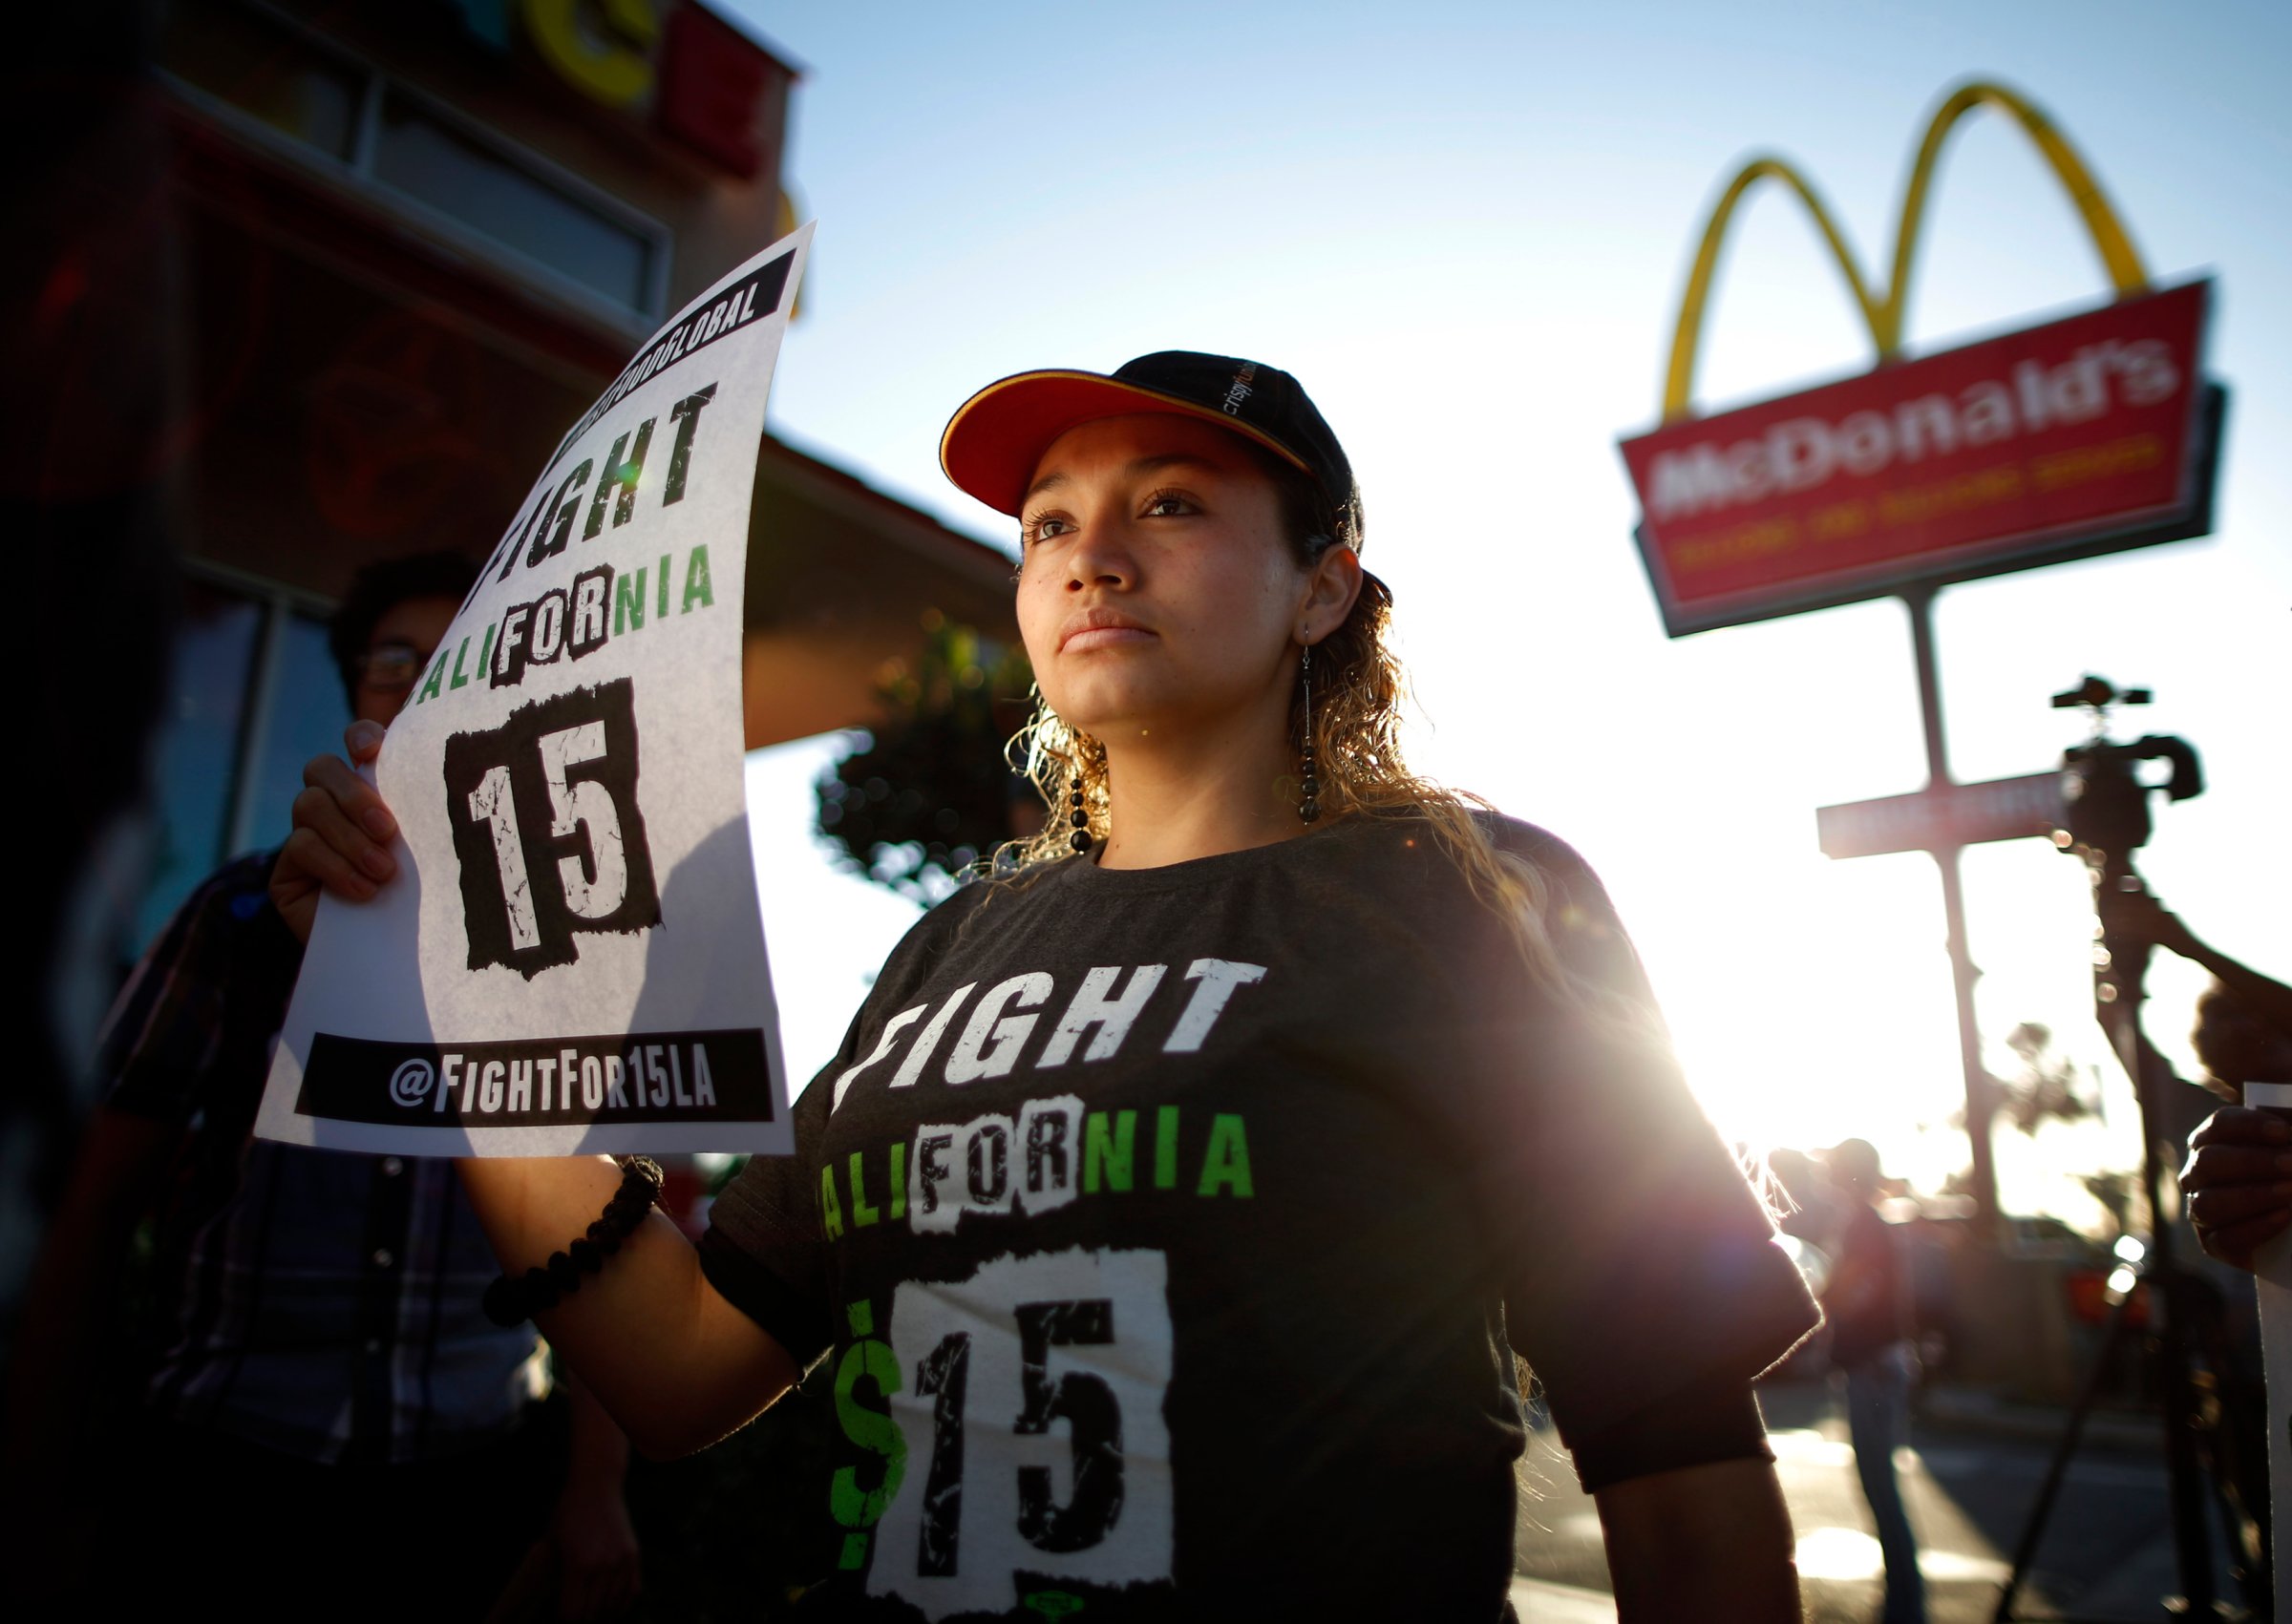 Demonstrators take part in a protest to demand higher wages for fast-food workers outside McDonald's in Los Angeles on May 15, 2014.